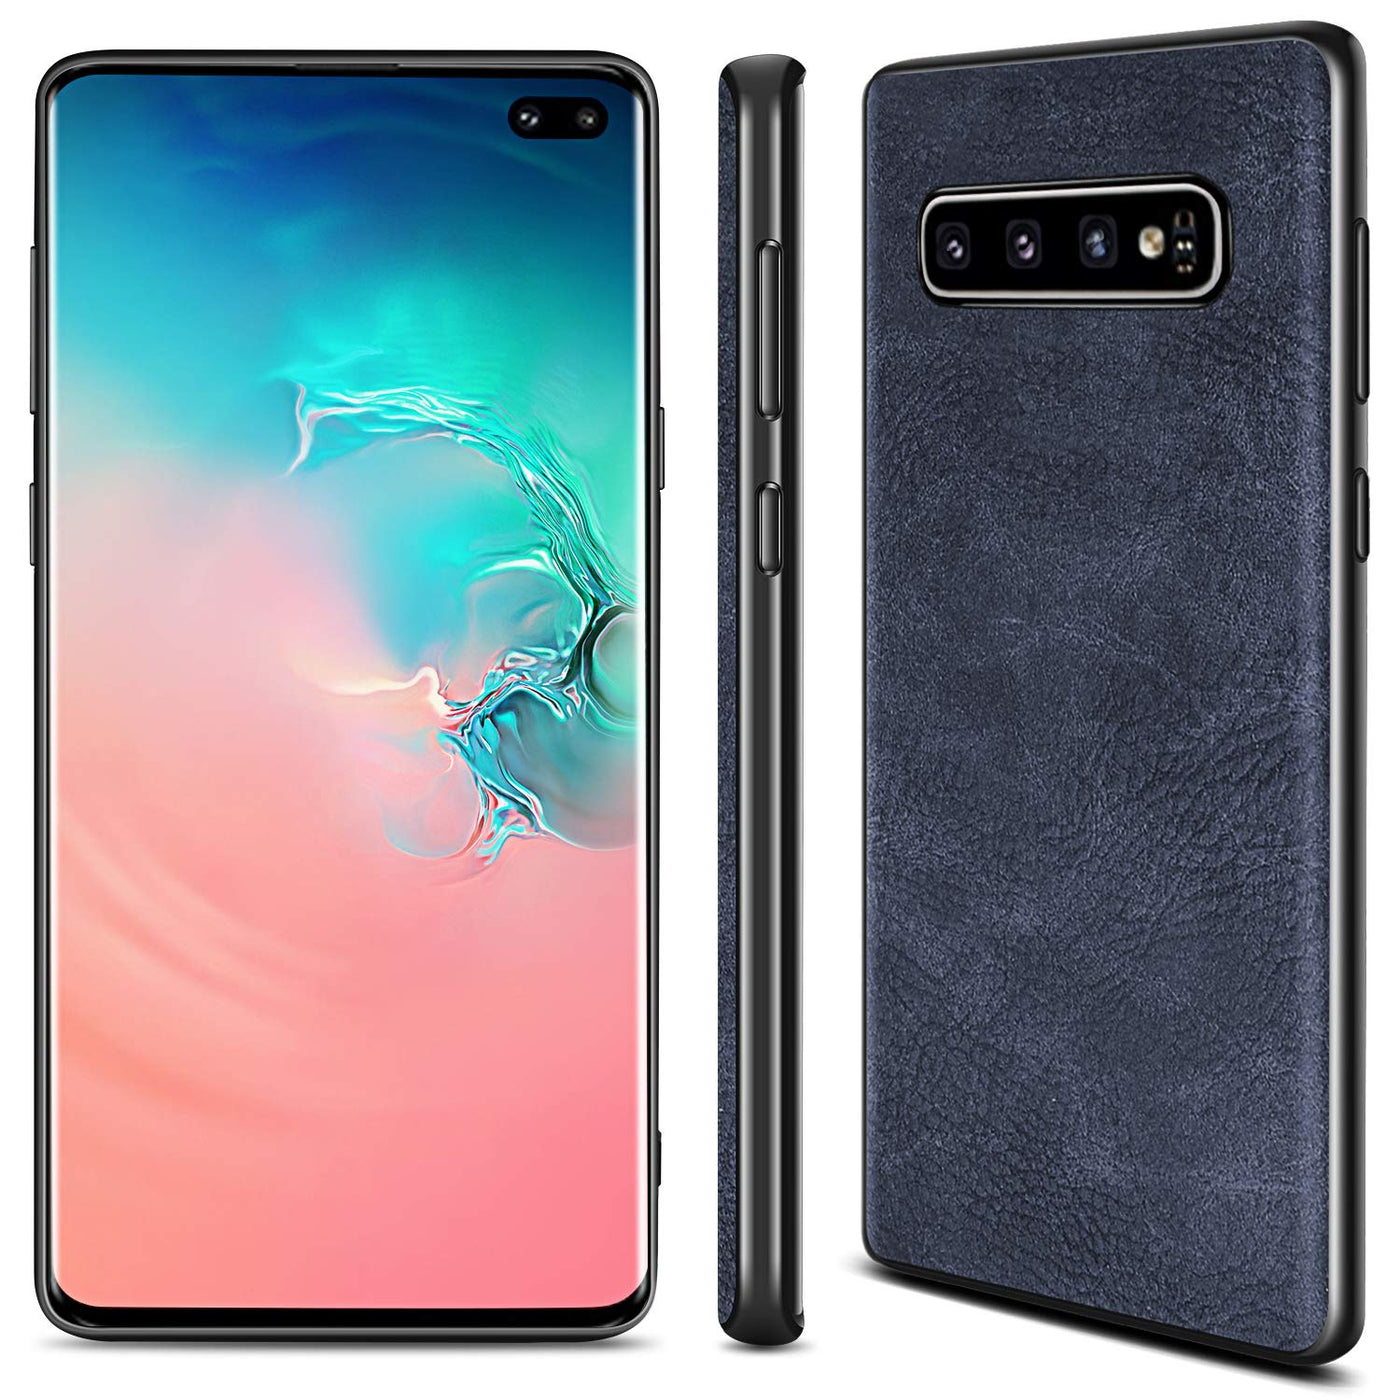 Excelsior Premium PU Leather Back Cover Case For Samsung Galaxy S10 Plus